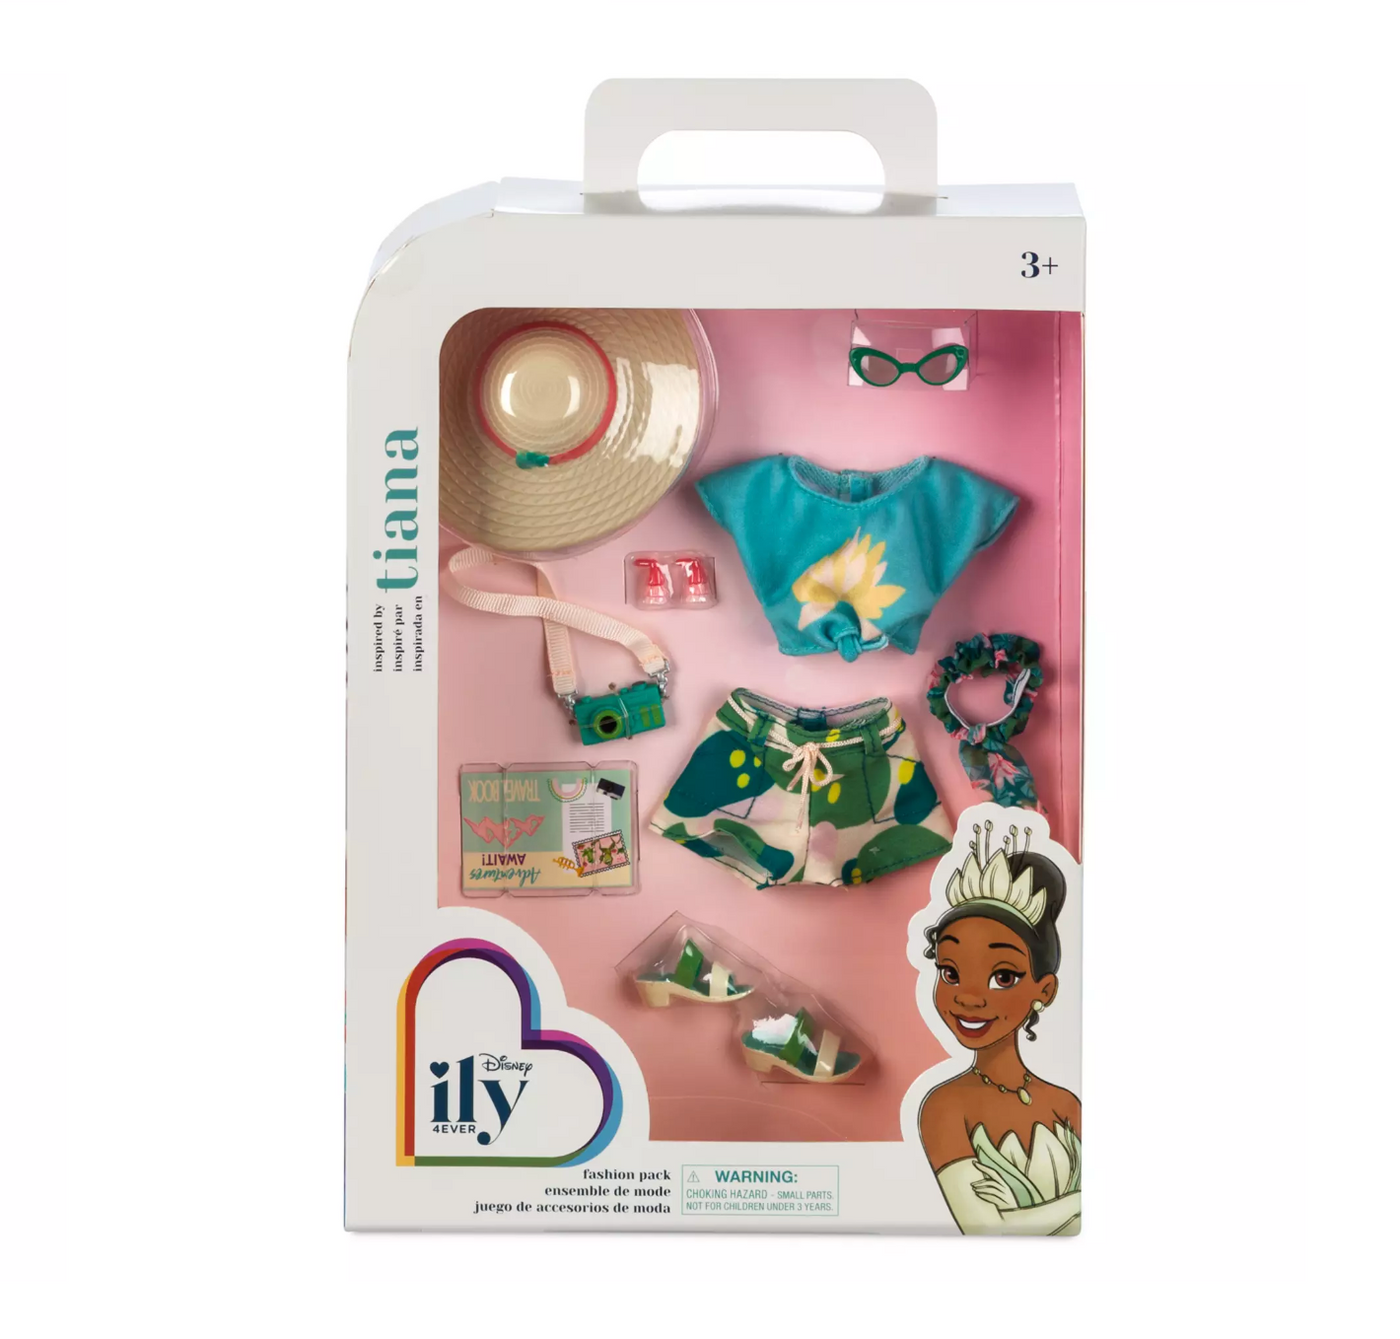 Disney ily 4EVER Fashion Pack Inspired by Tiana The Princess and the Frog New